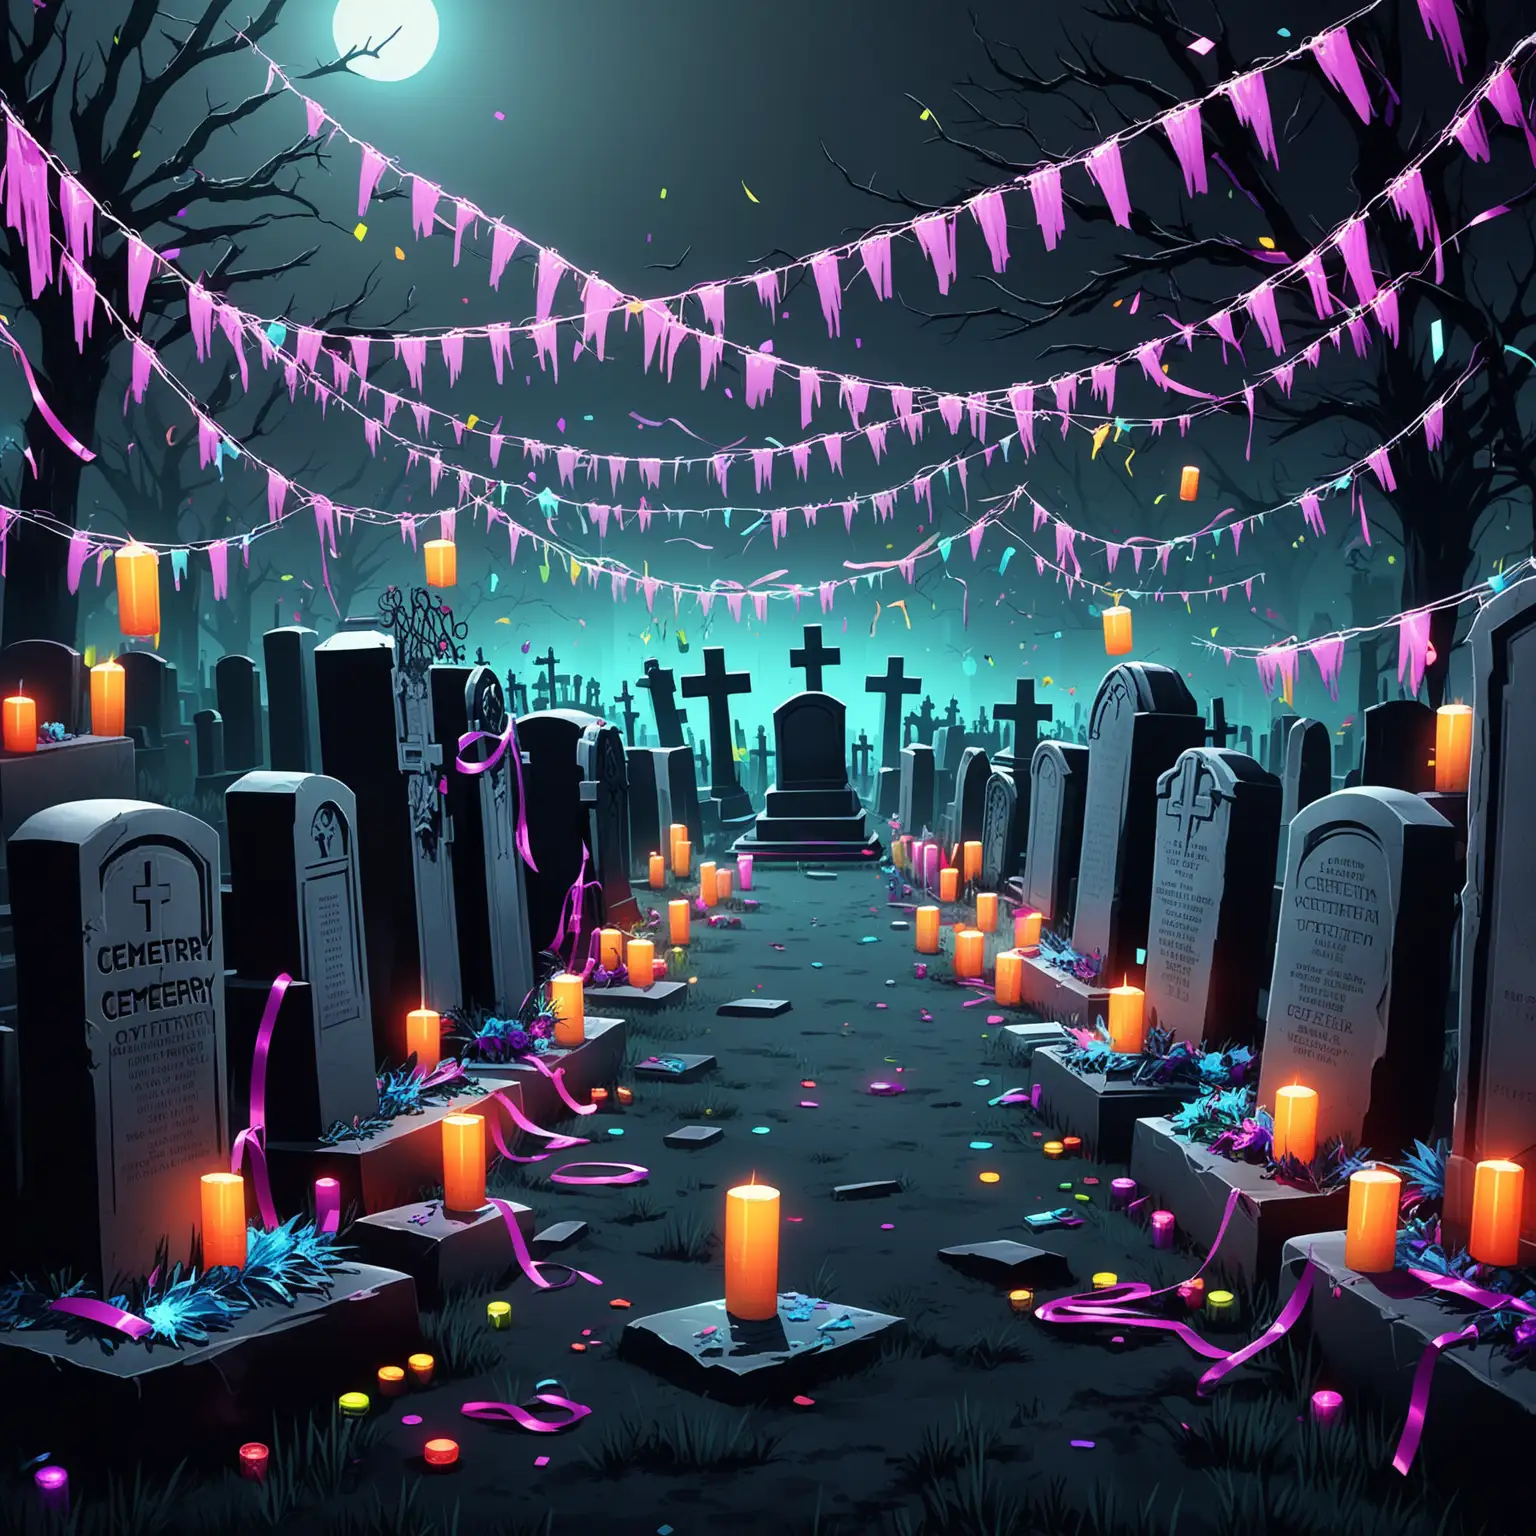 Cyberpunk-Cemetery-Party-with-Tombstone-Details-and-Decorative-Lights